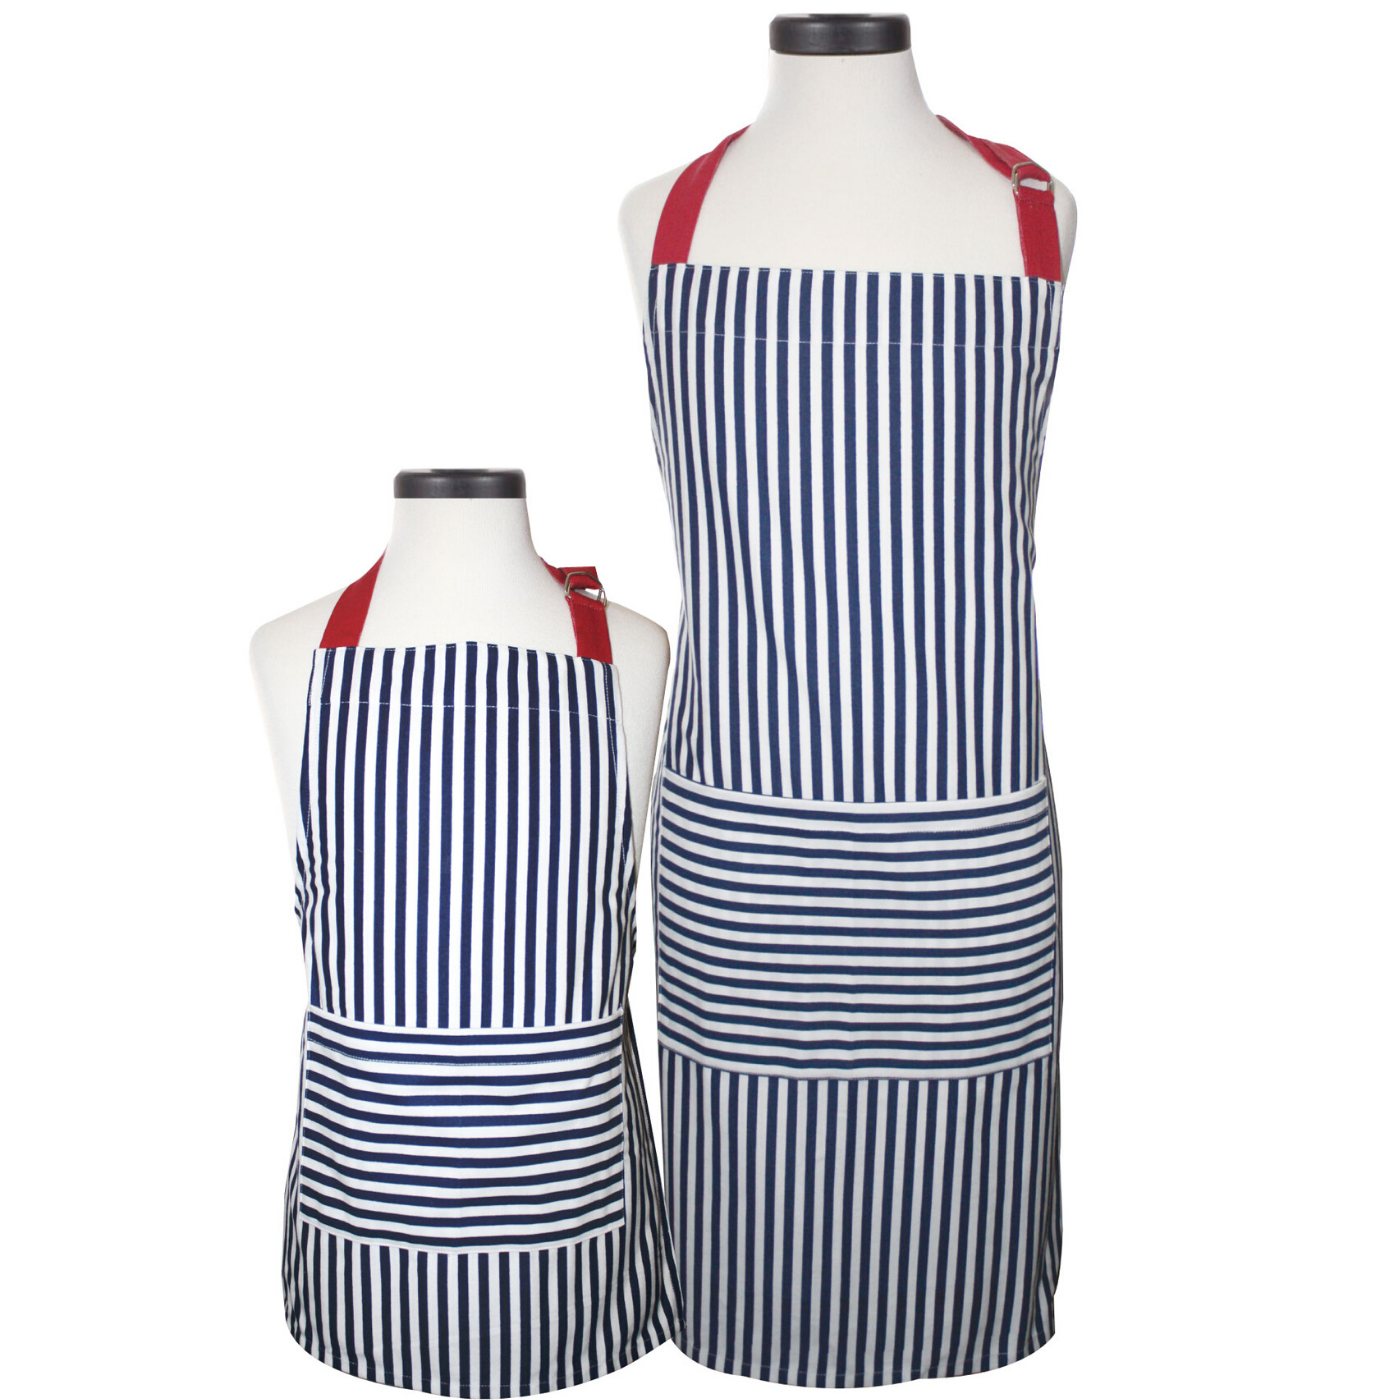 Handstand Kitchen Mother and Daughter Sprinkles 100% Cotton Apron Set